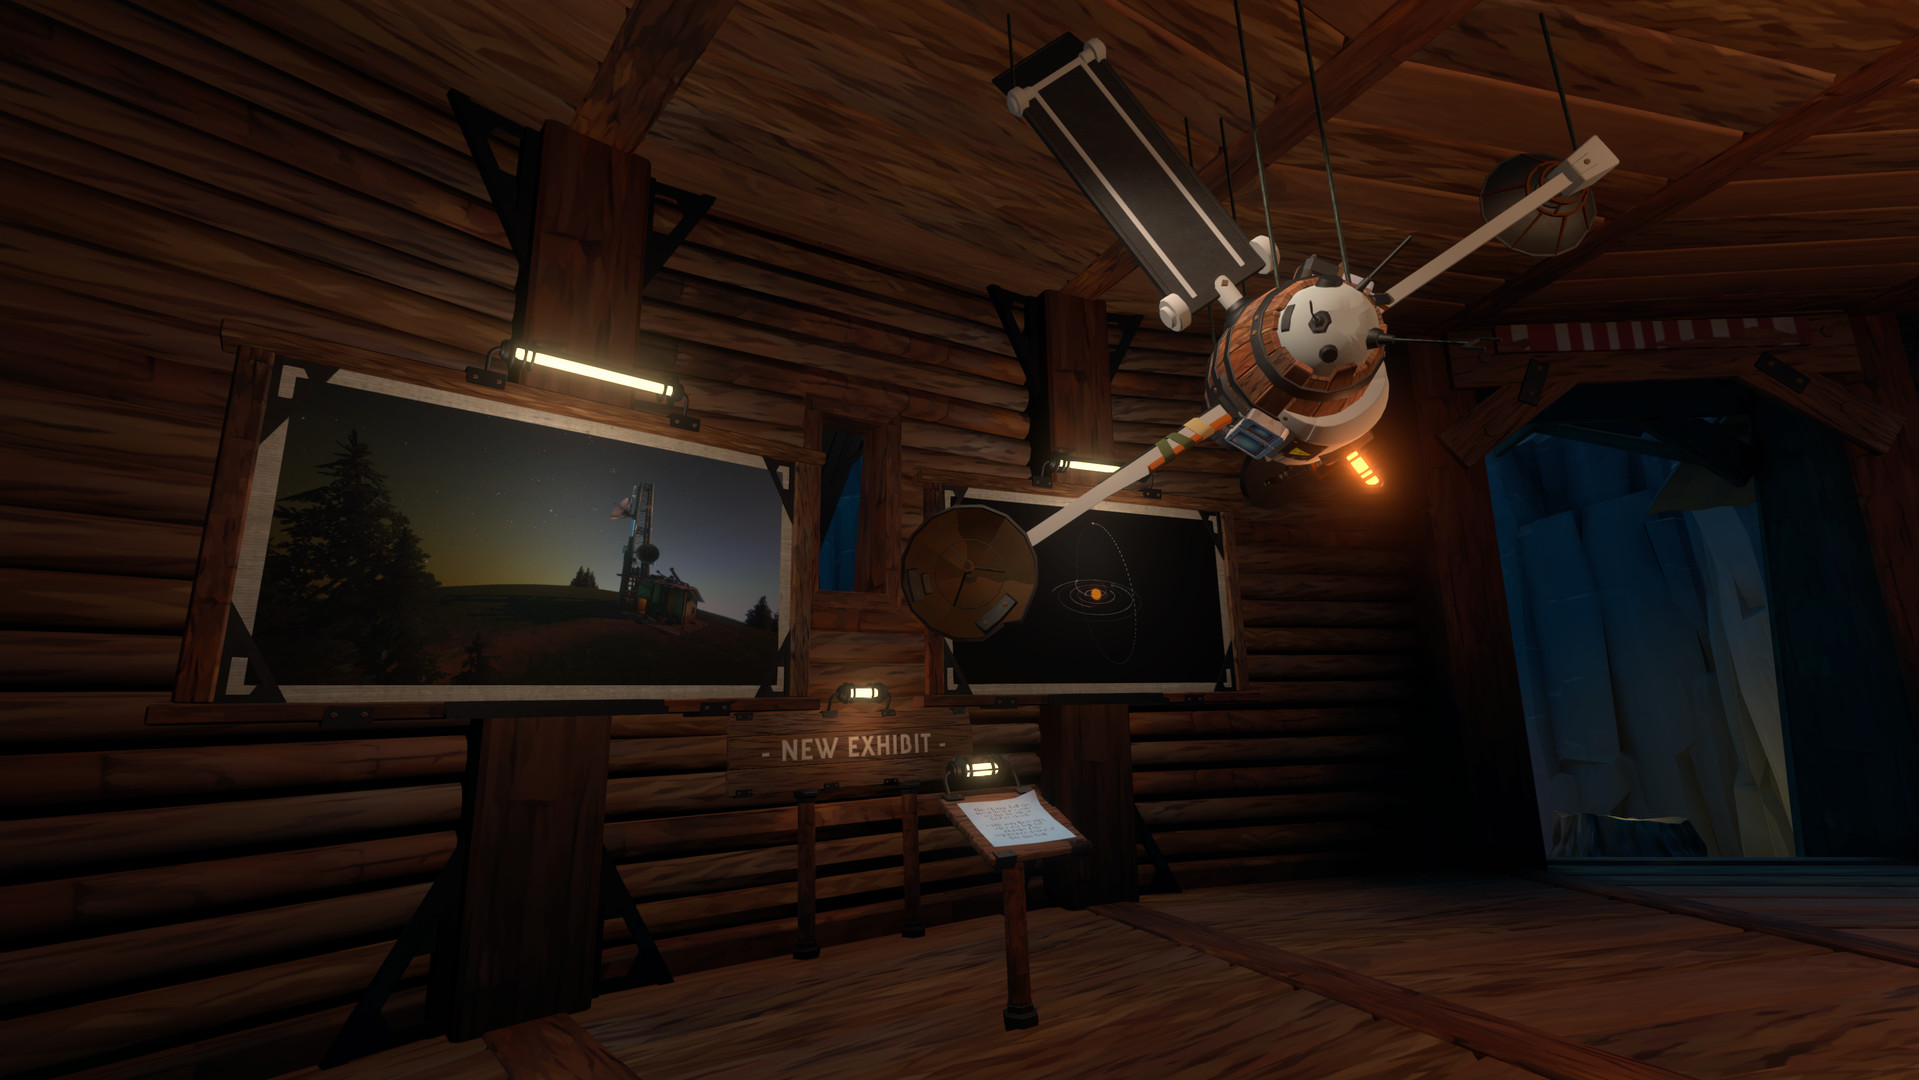 Outer Wilds - Echoes of the Eye | MA-Asia (bac64499-685a-4a7c-85a1-e5f2e7551f13)